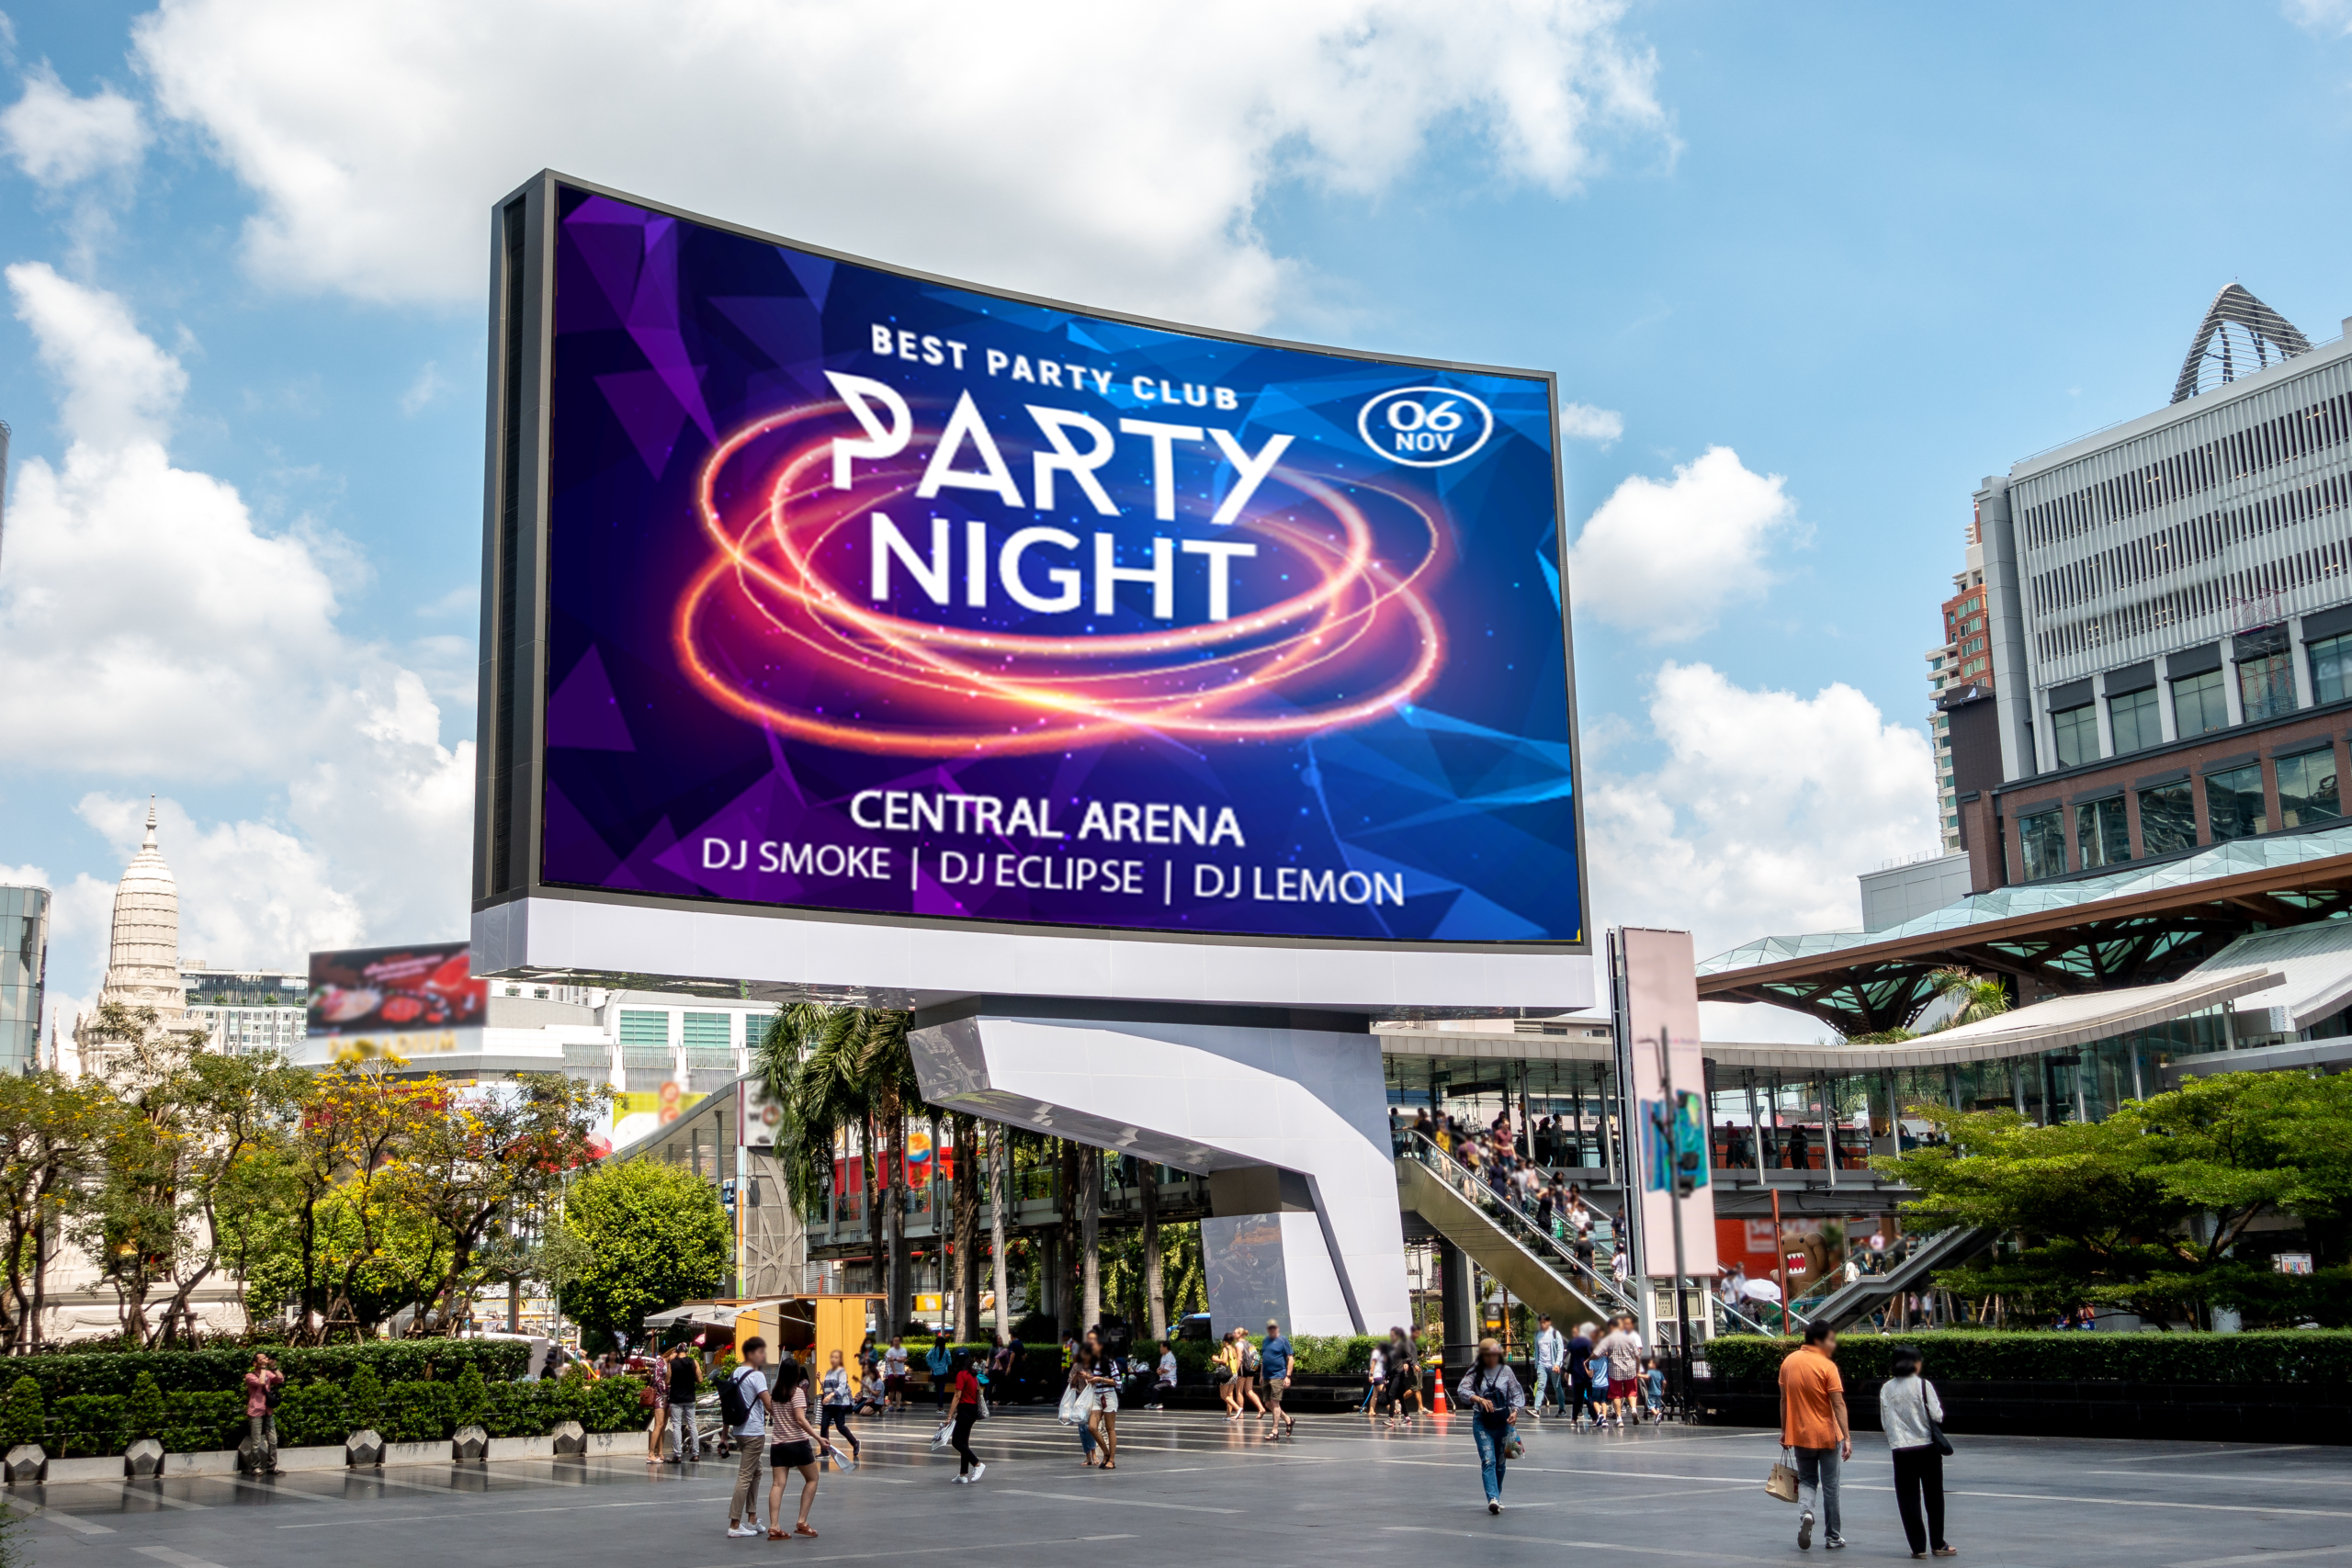 Large LED screen advertising "party night" in an outside pedestrian area